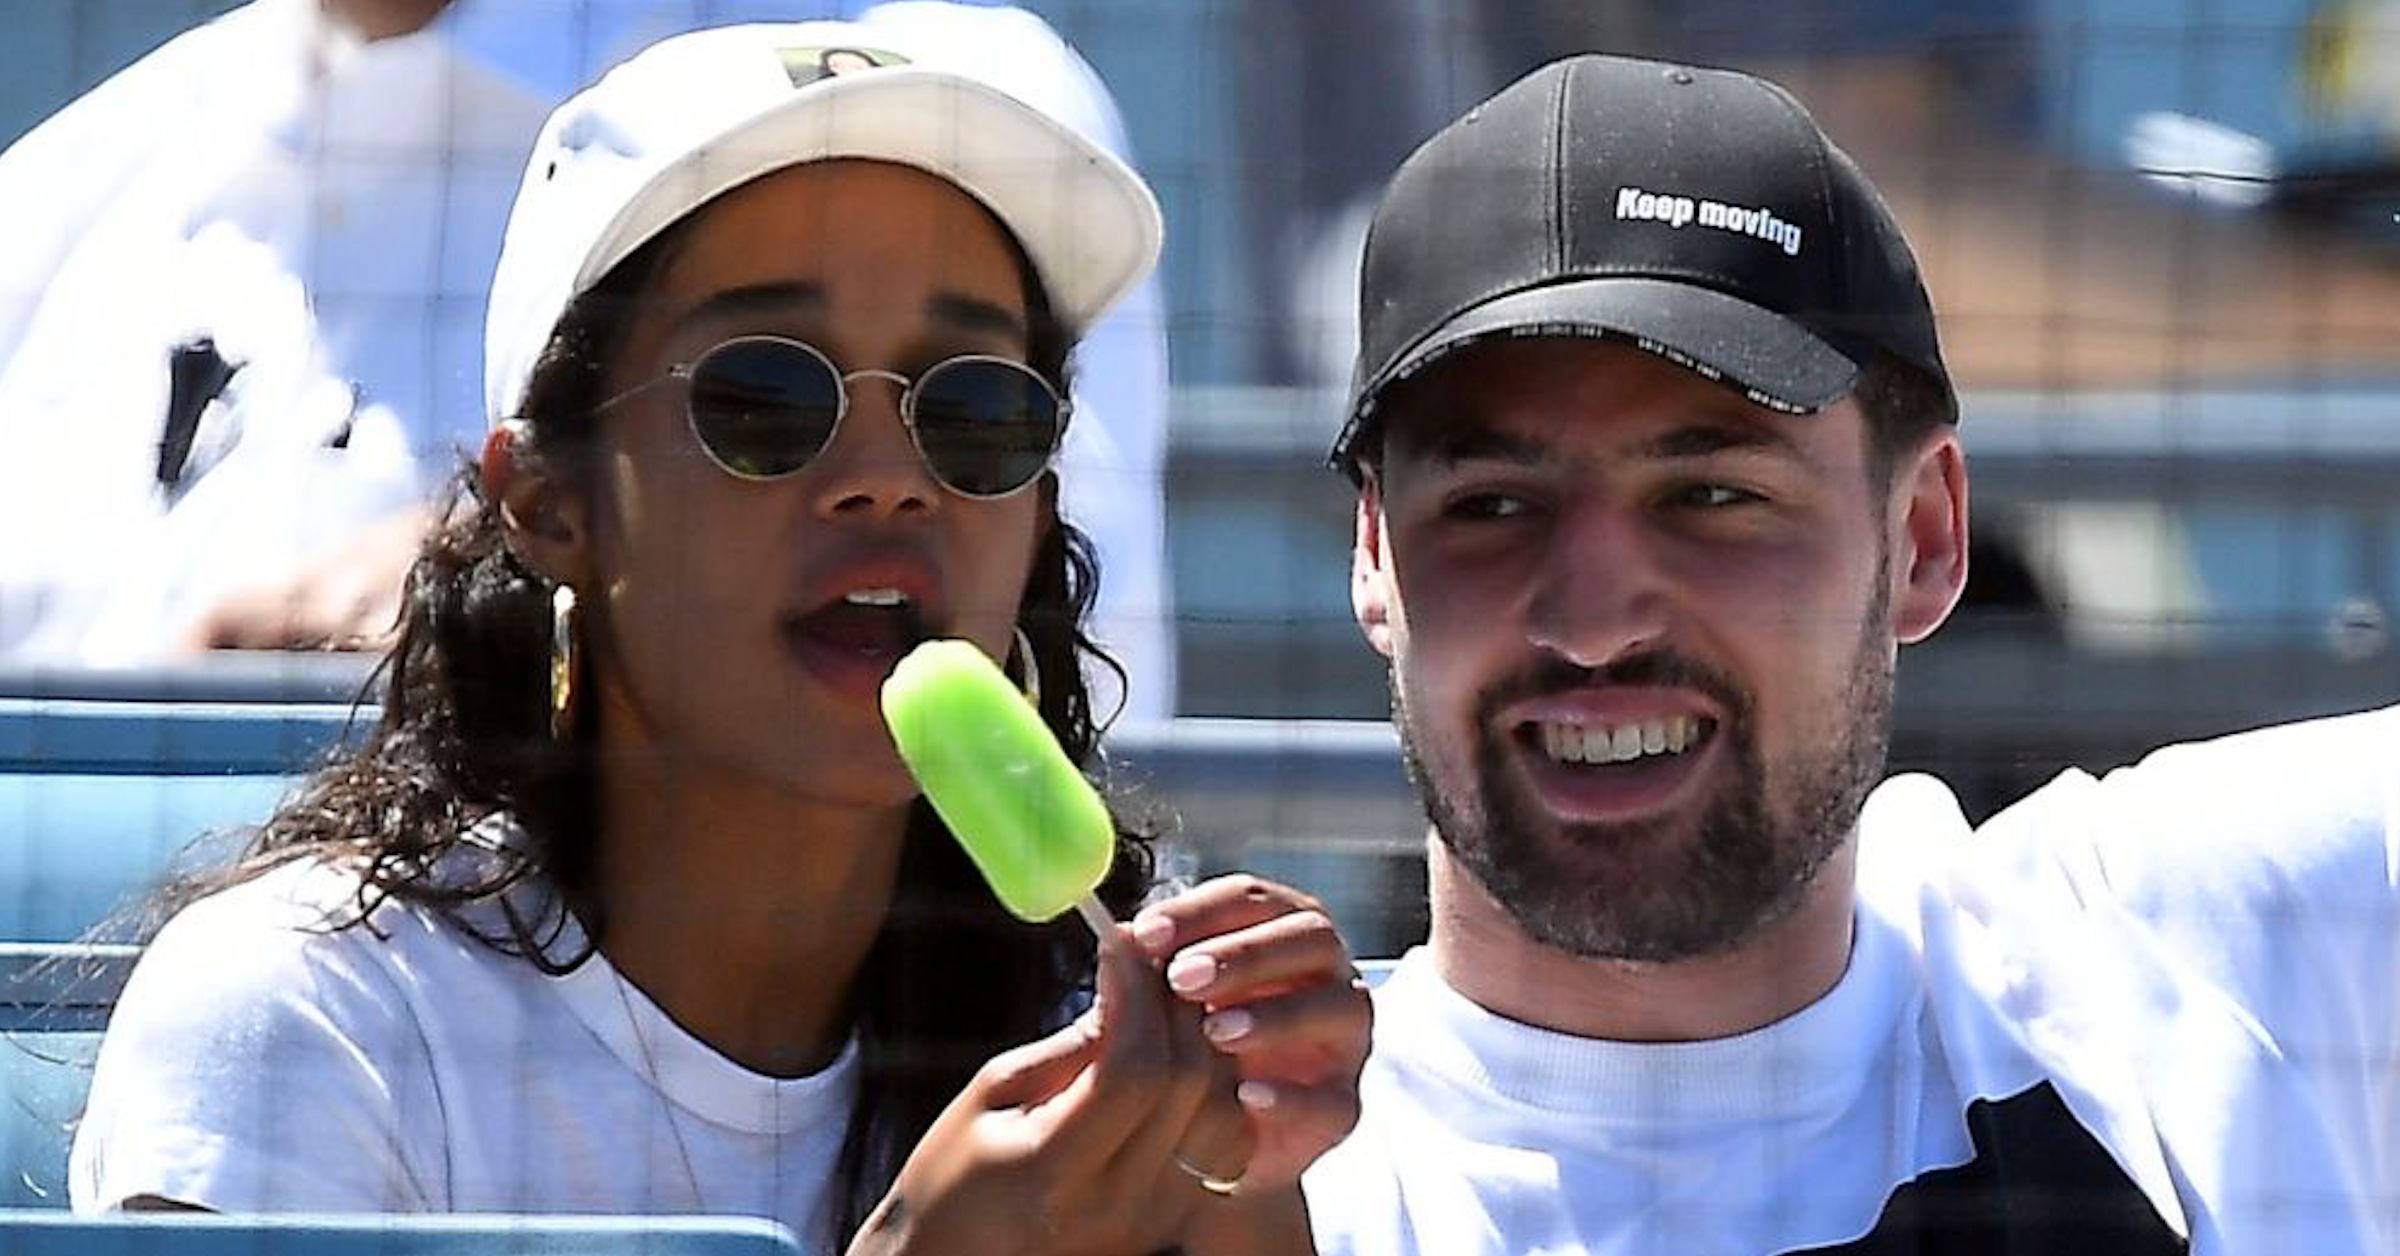 Klay Thompson #11 of the Golden State Warriors and actress Laura Harrier attend the Los Angeles Dodgers and Miami Marlins baseball game